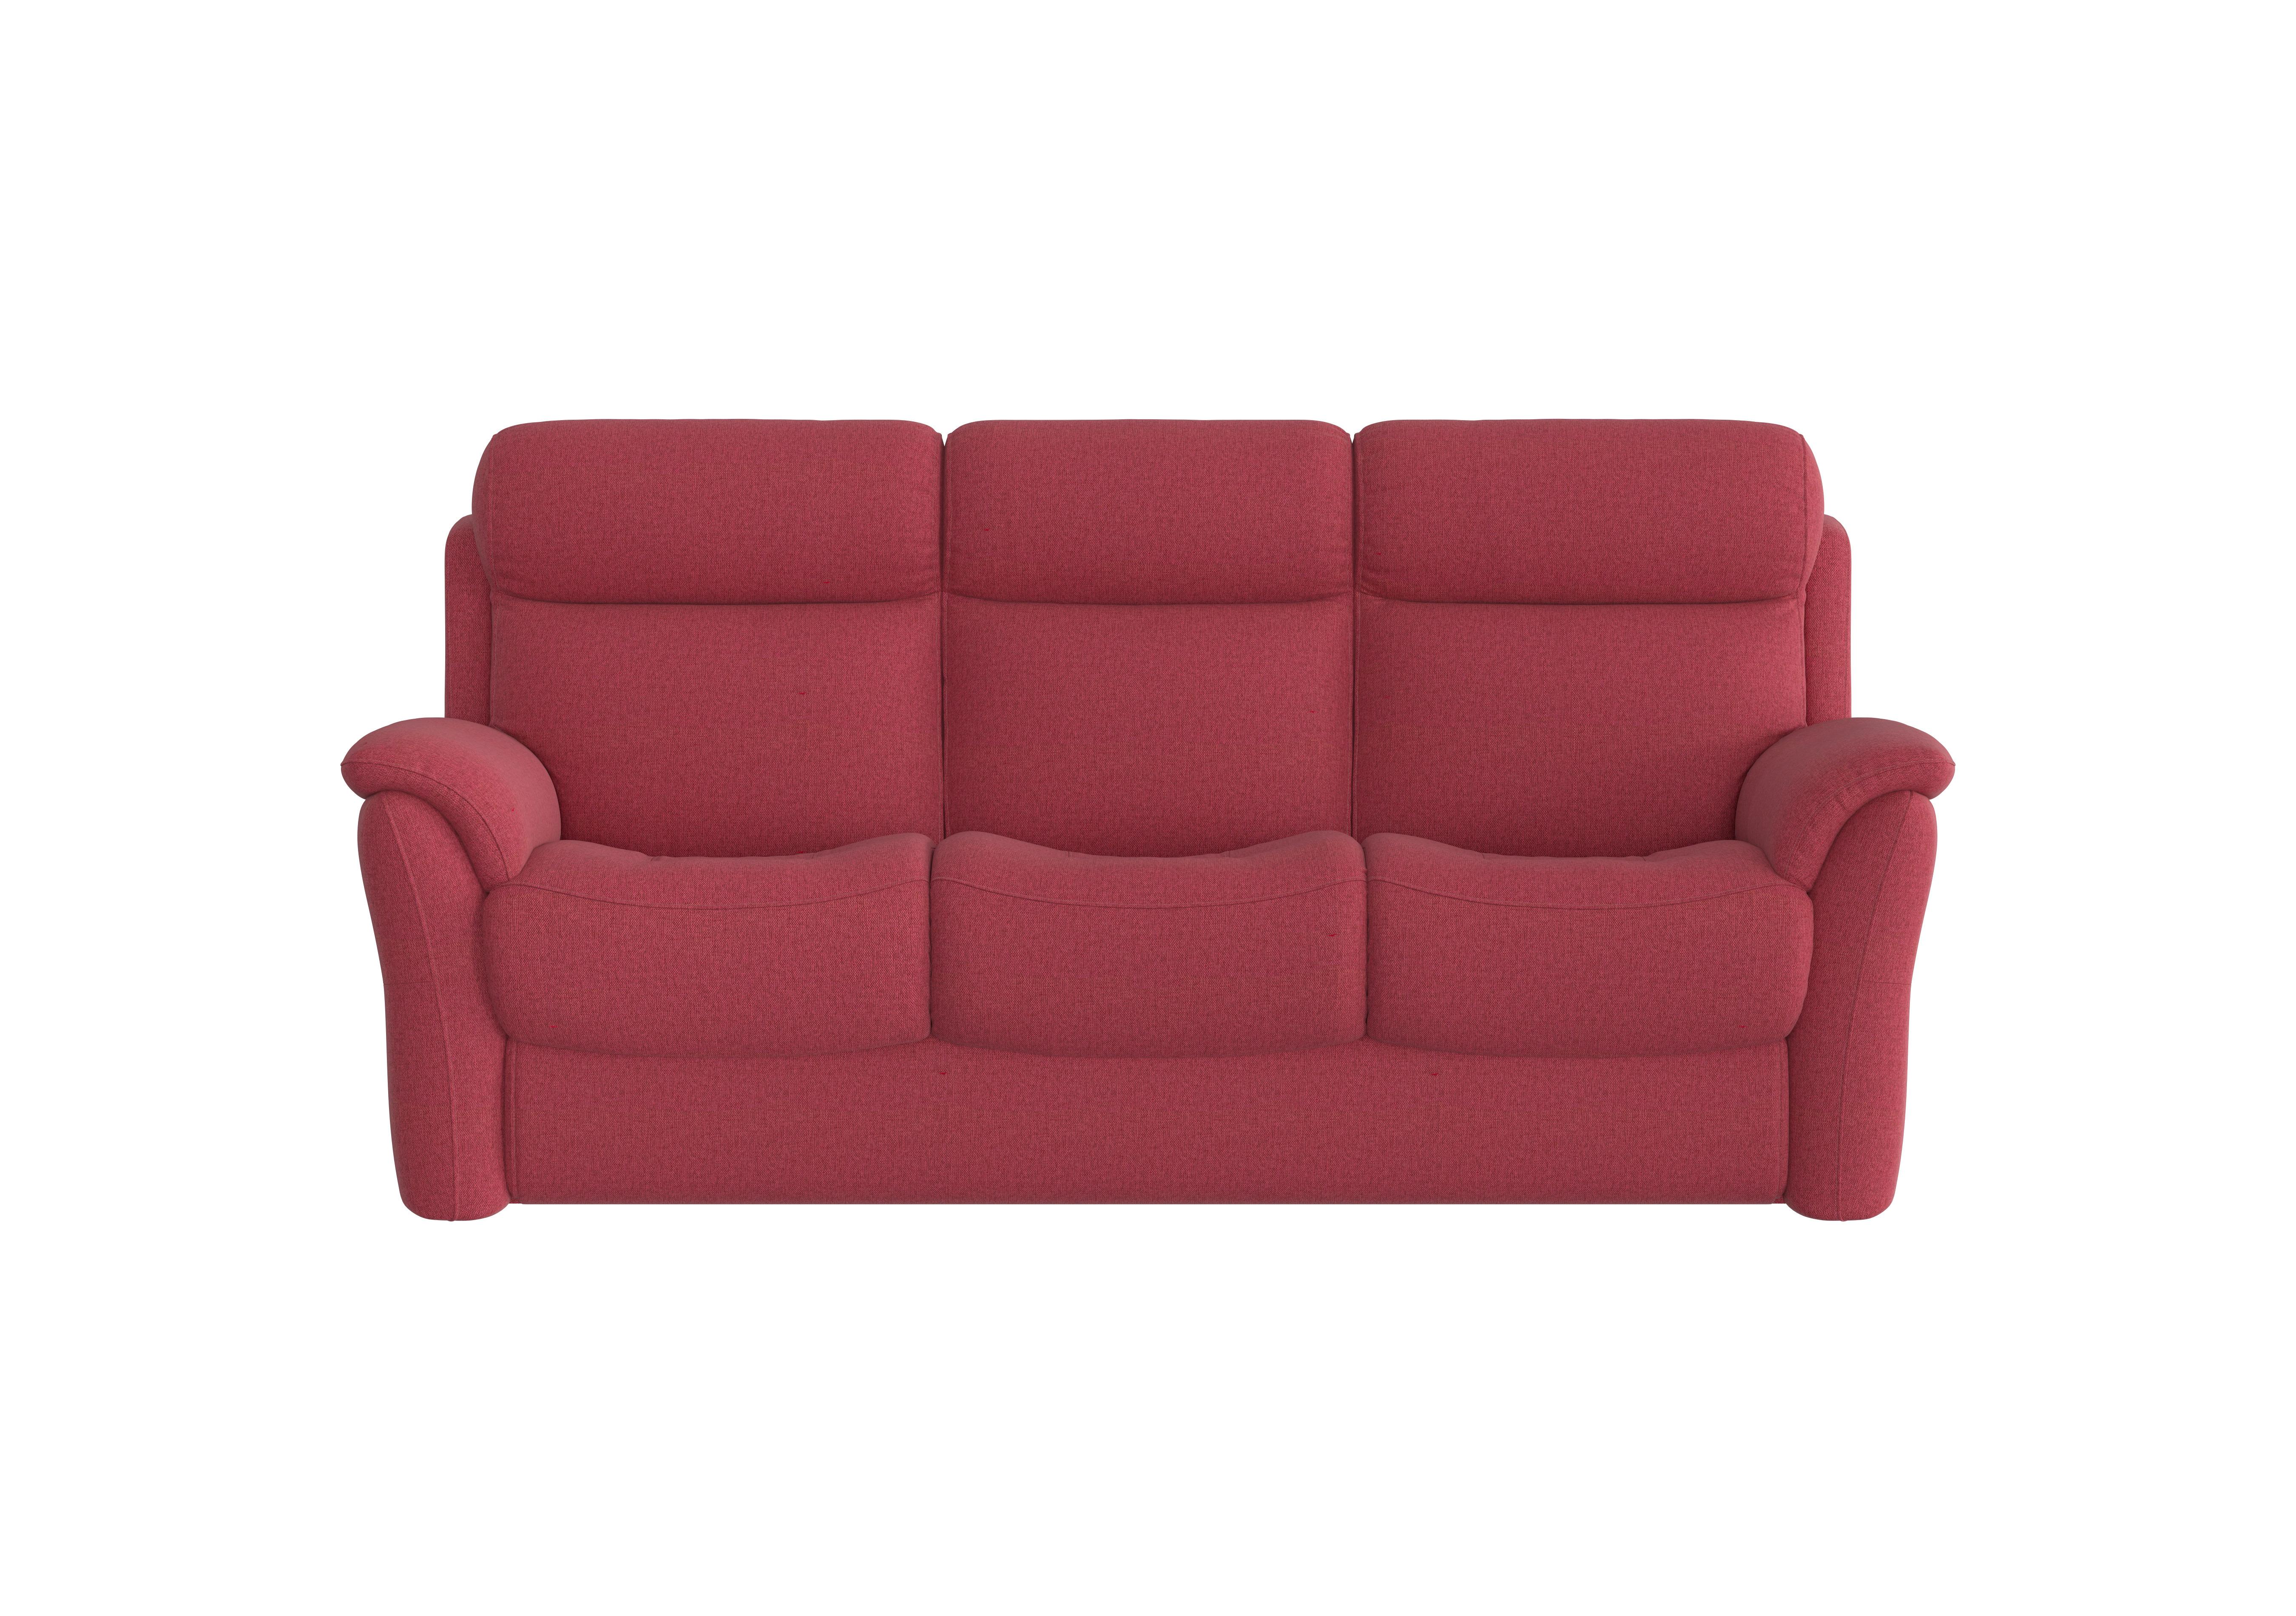 Relax Station Revive 3 Seater Fabric Sofa in Fab-Blt-R29 Red on Furniture Village